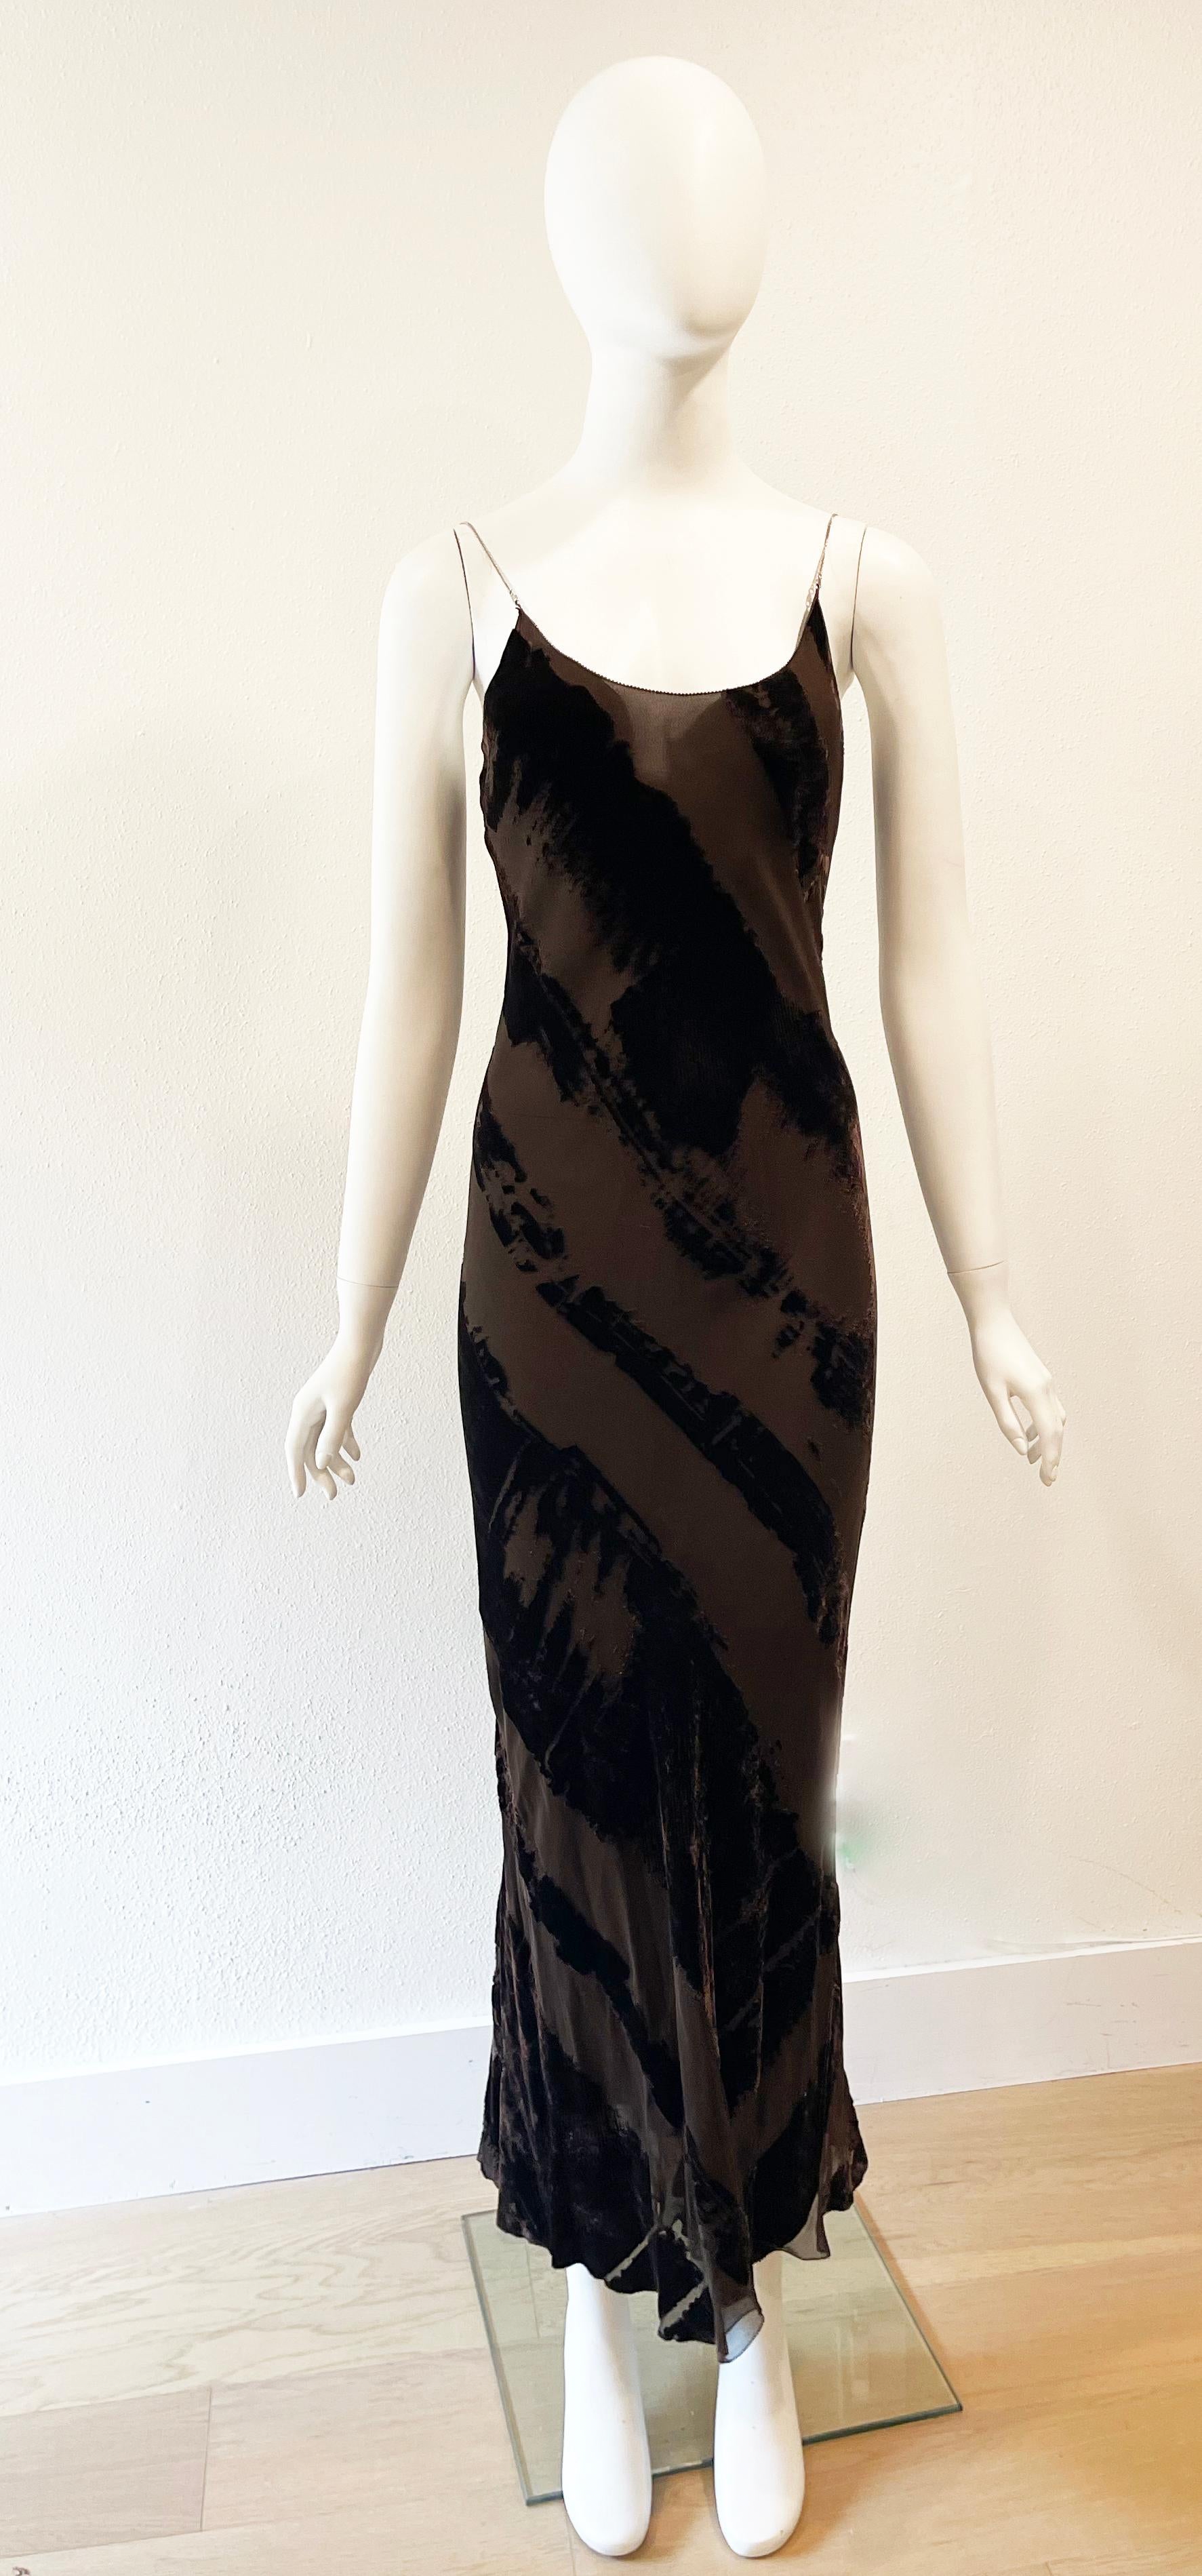 1990s Jean Paul Gaultier Slip Dress
brown print with chain straps
Size S
Condition: Very good
23